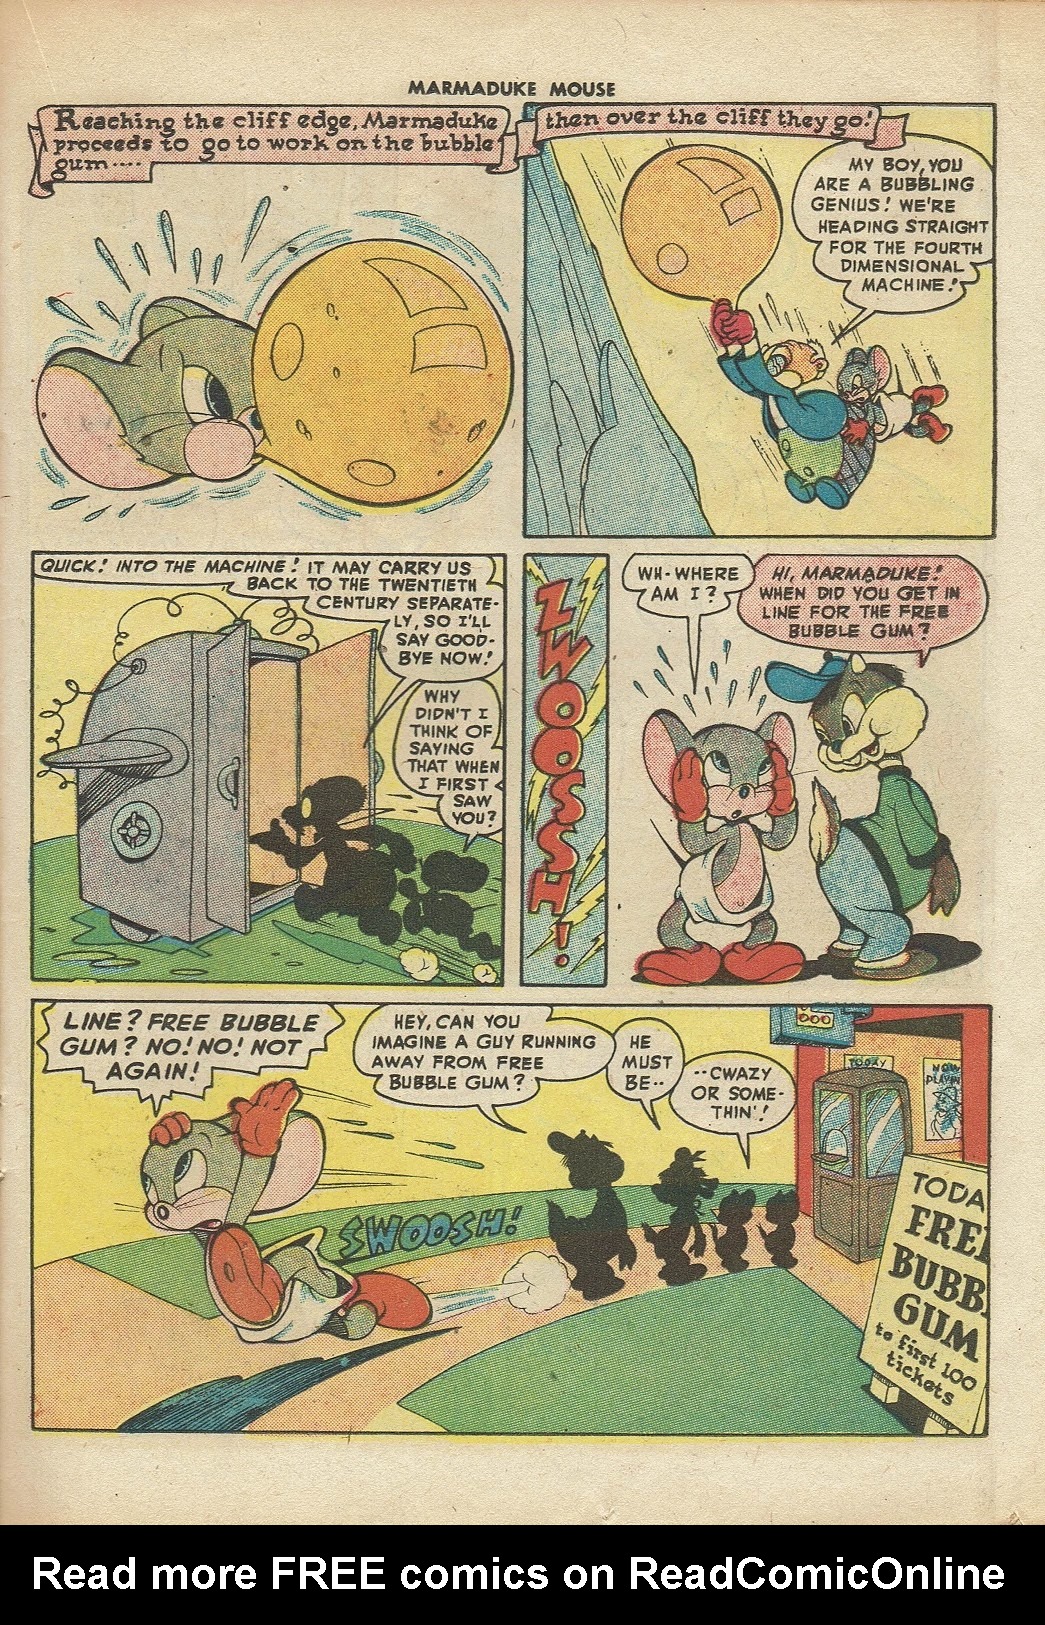 Read online Marmaduke Mouse comic -  Issue #7 - 31